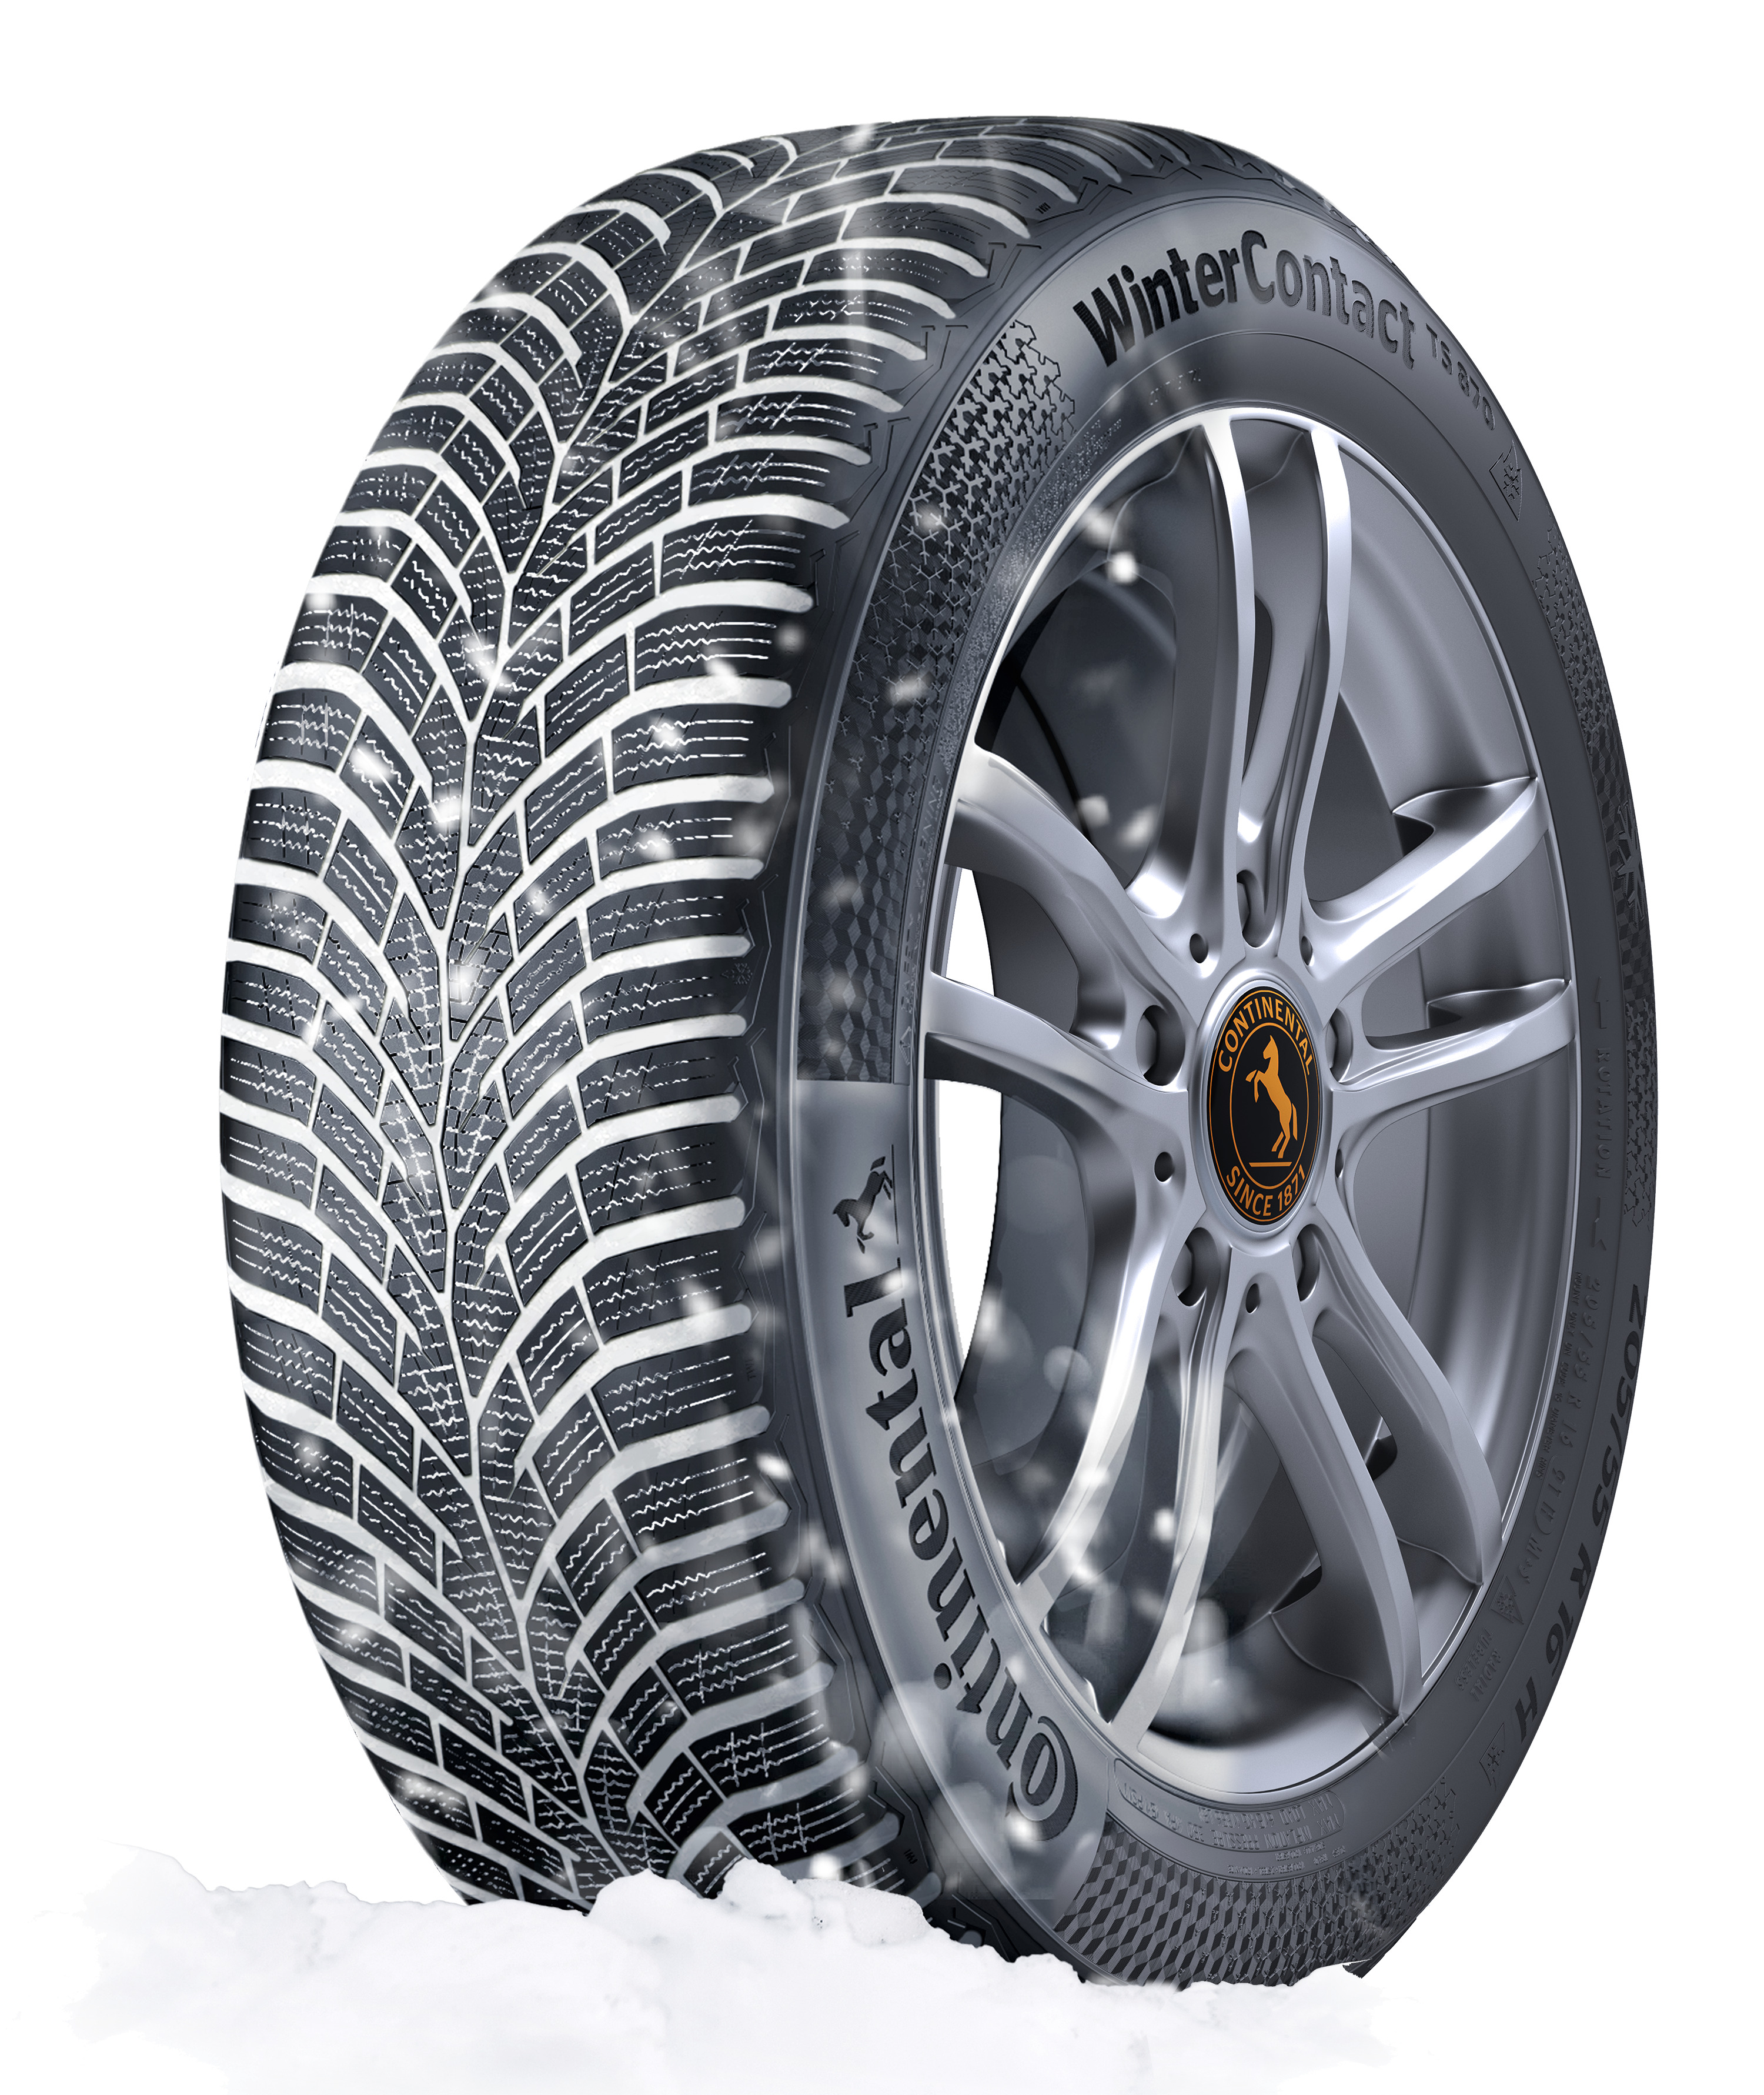 TS Continental\'s takes Test Auto win the Continental Express Tyre AG - the in WinterContact™ 870 Winter